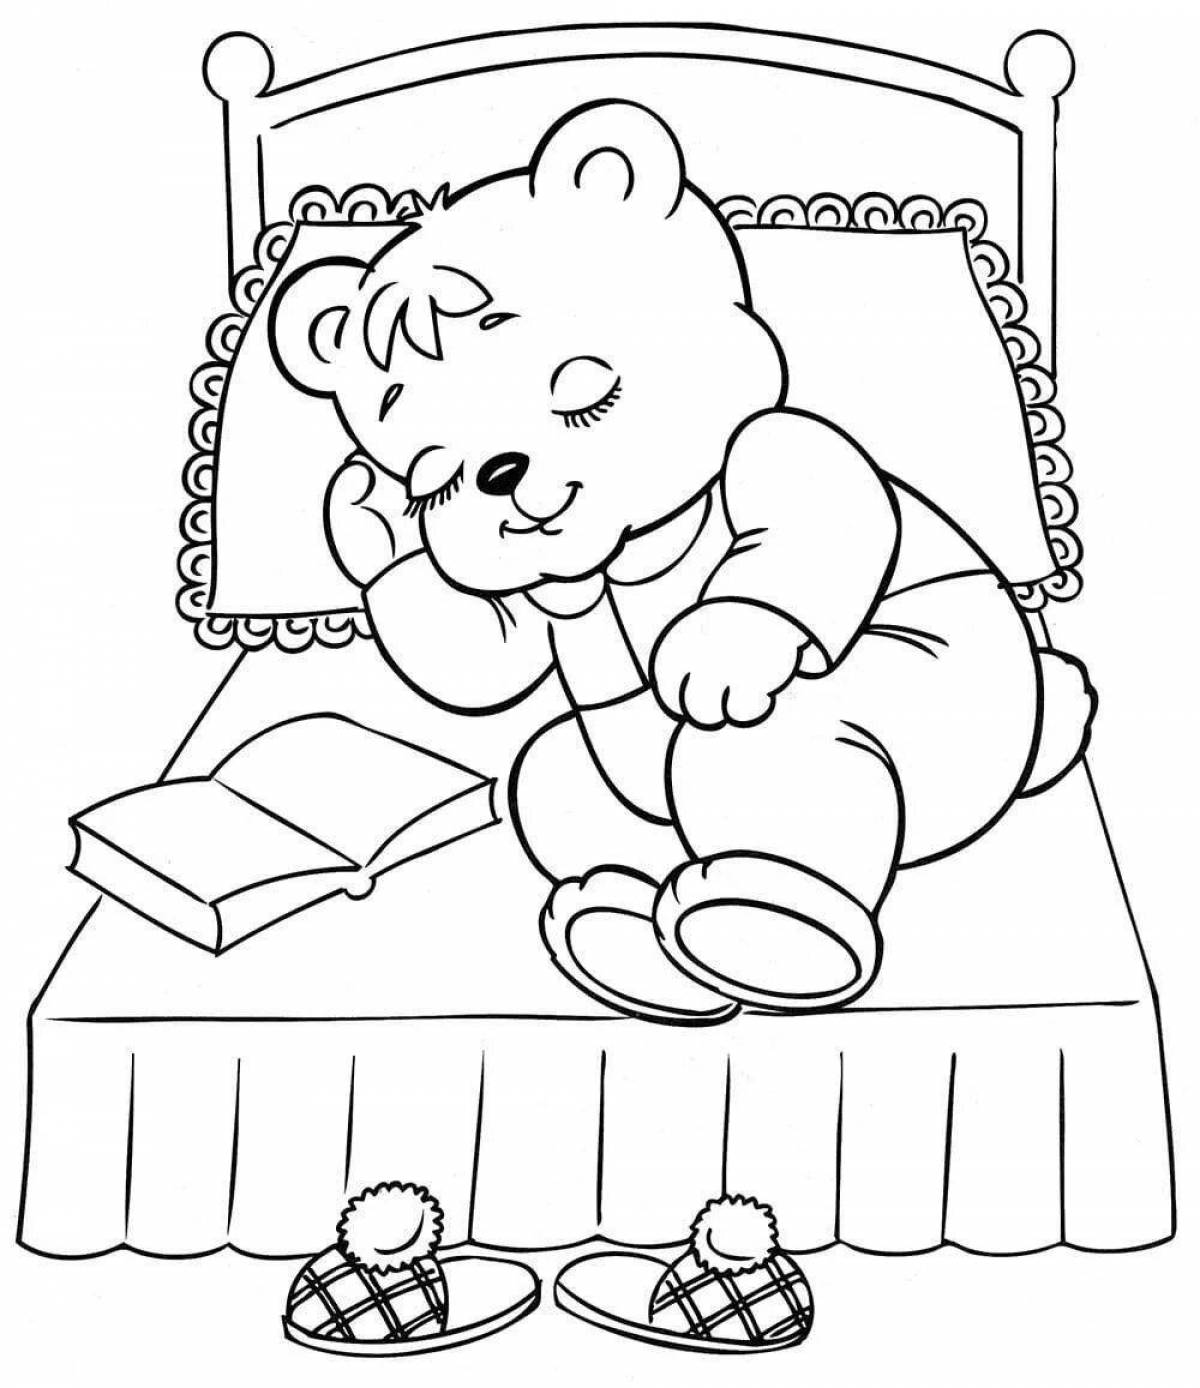 Snuggly teddy bear coloring page